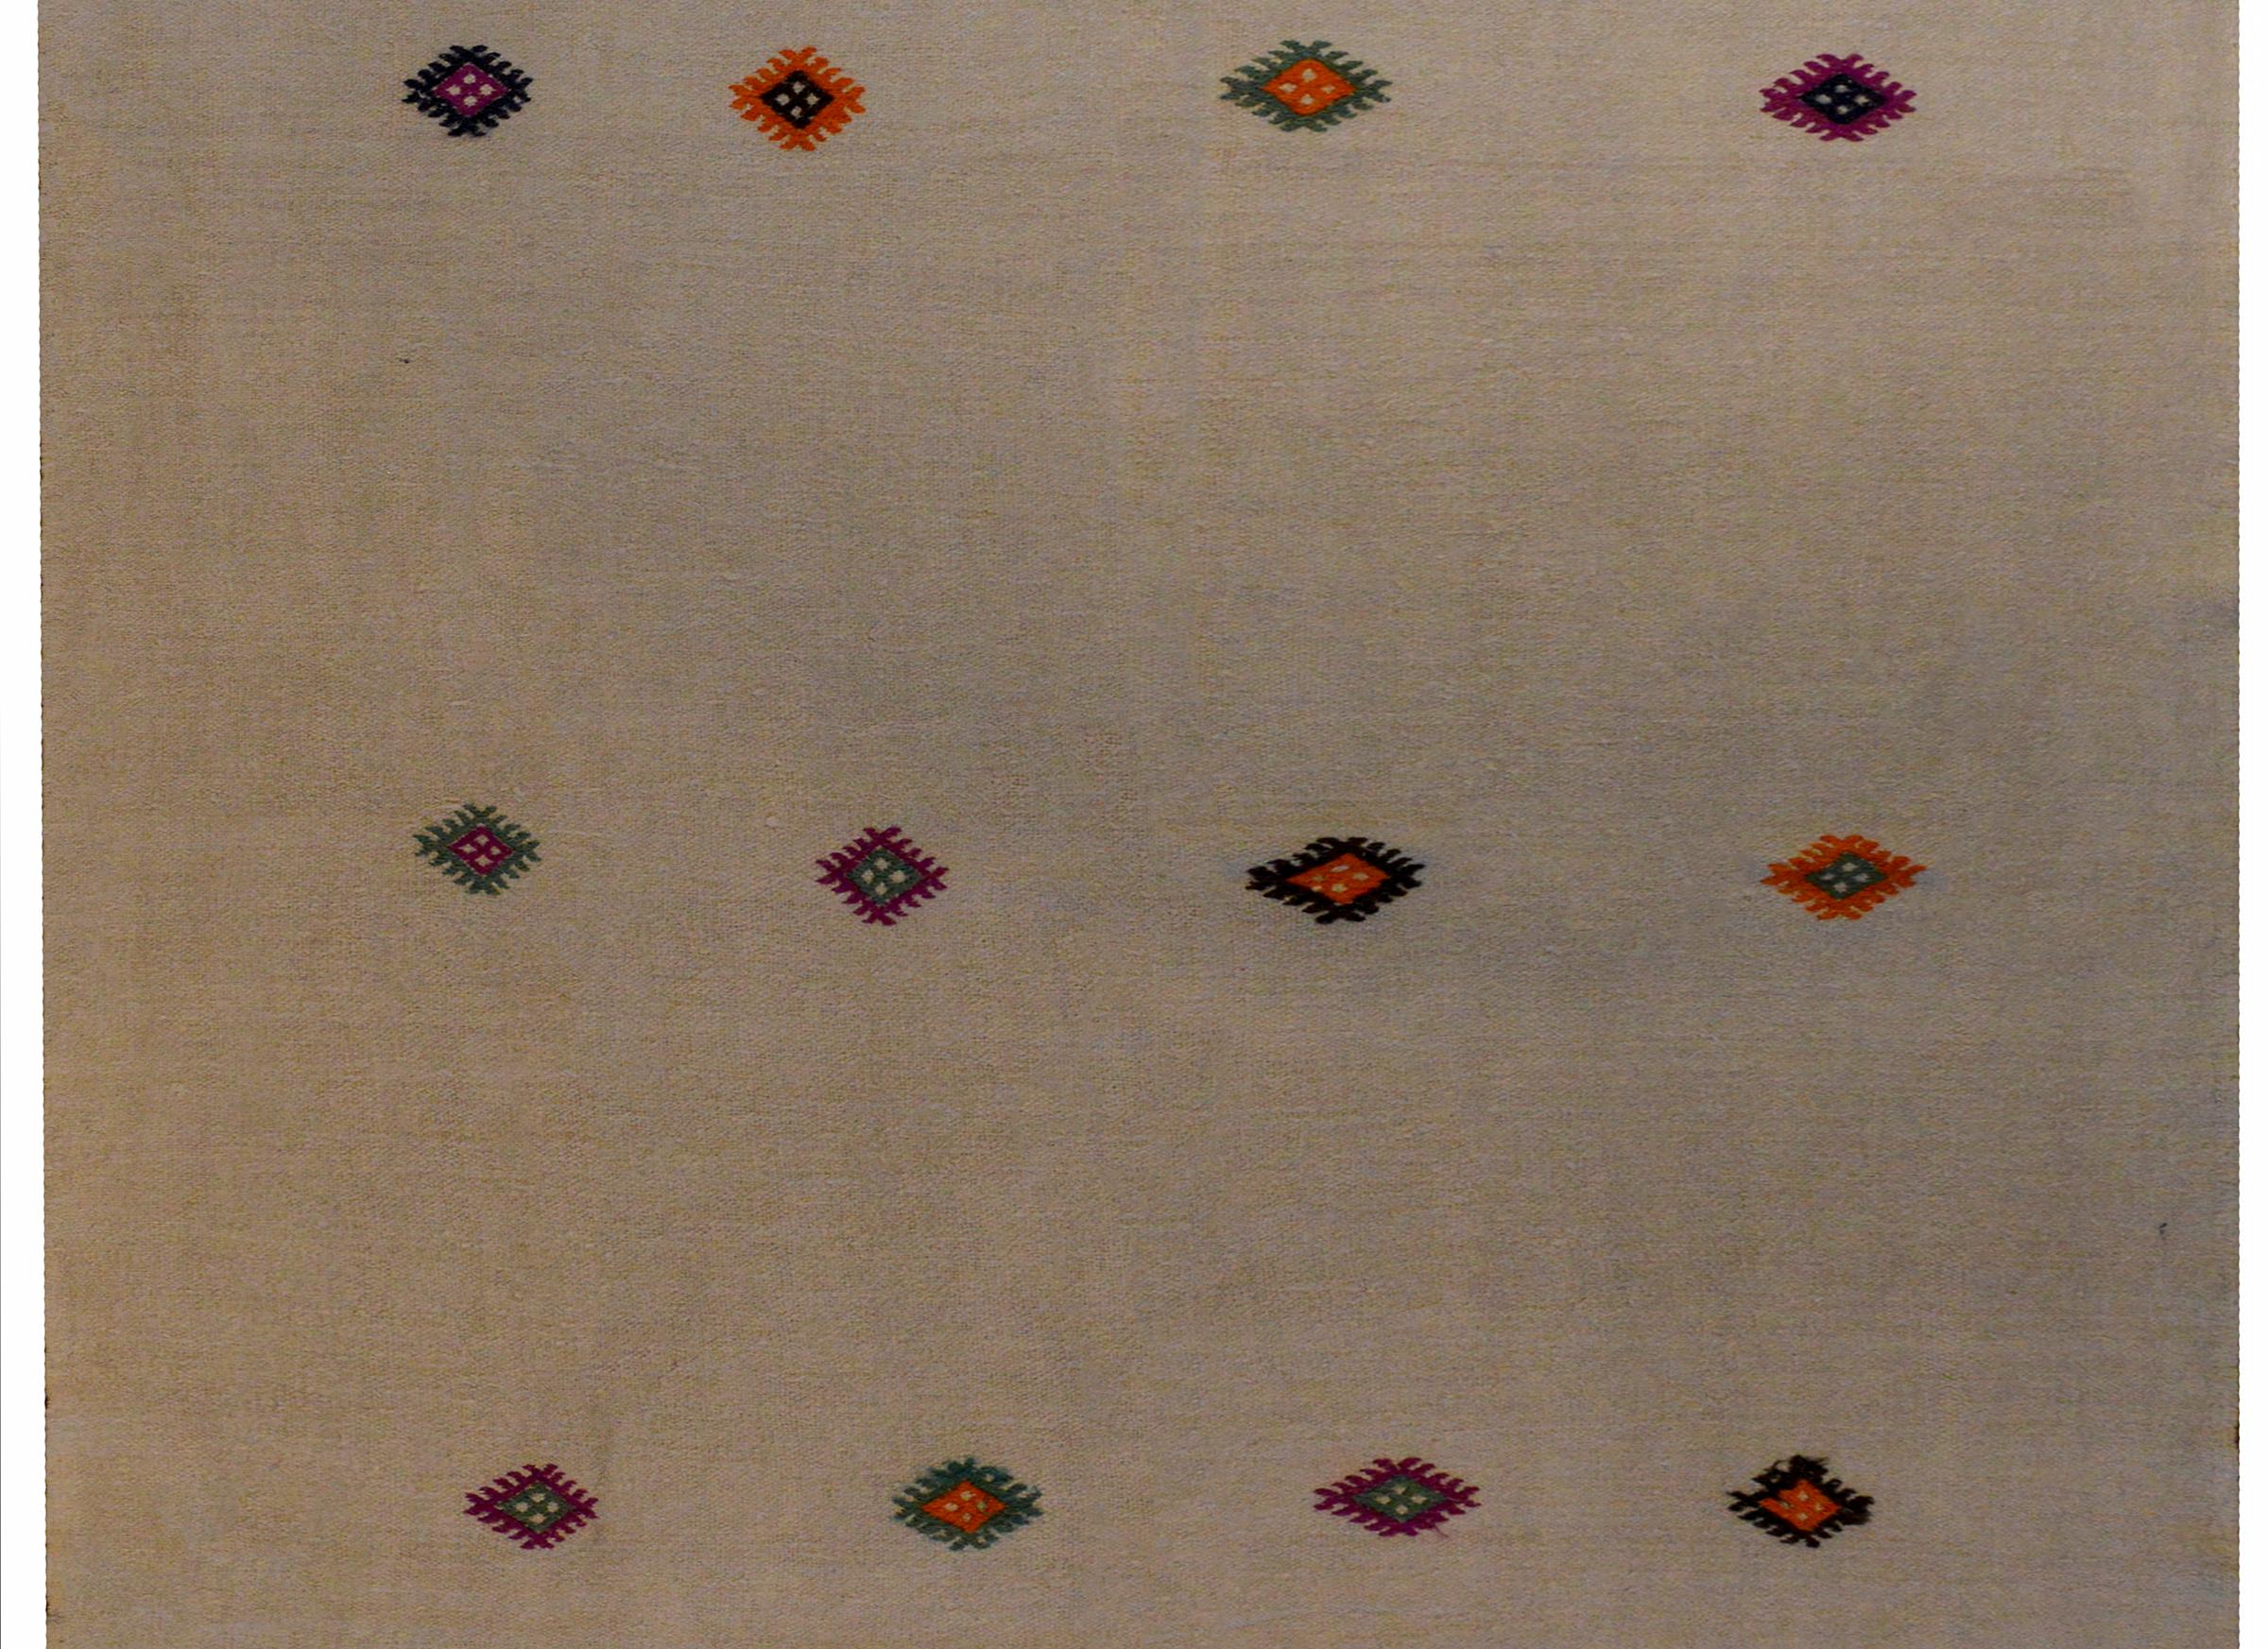 A wonderful mid-20th century Turkish Konya kilim rug with a simple pattern of stylized diamond medallions woven in crimson, green, violet, and gold vegetable dyed wool on a natural undyed cream wool background.